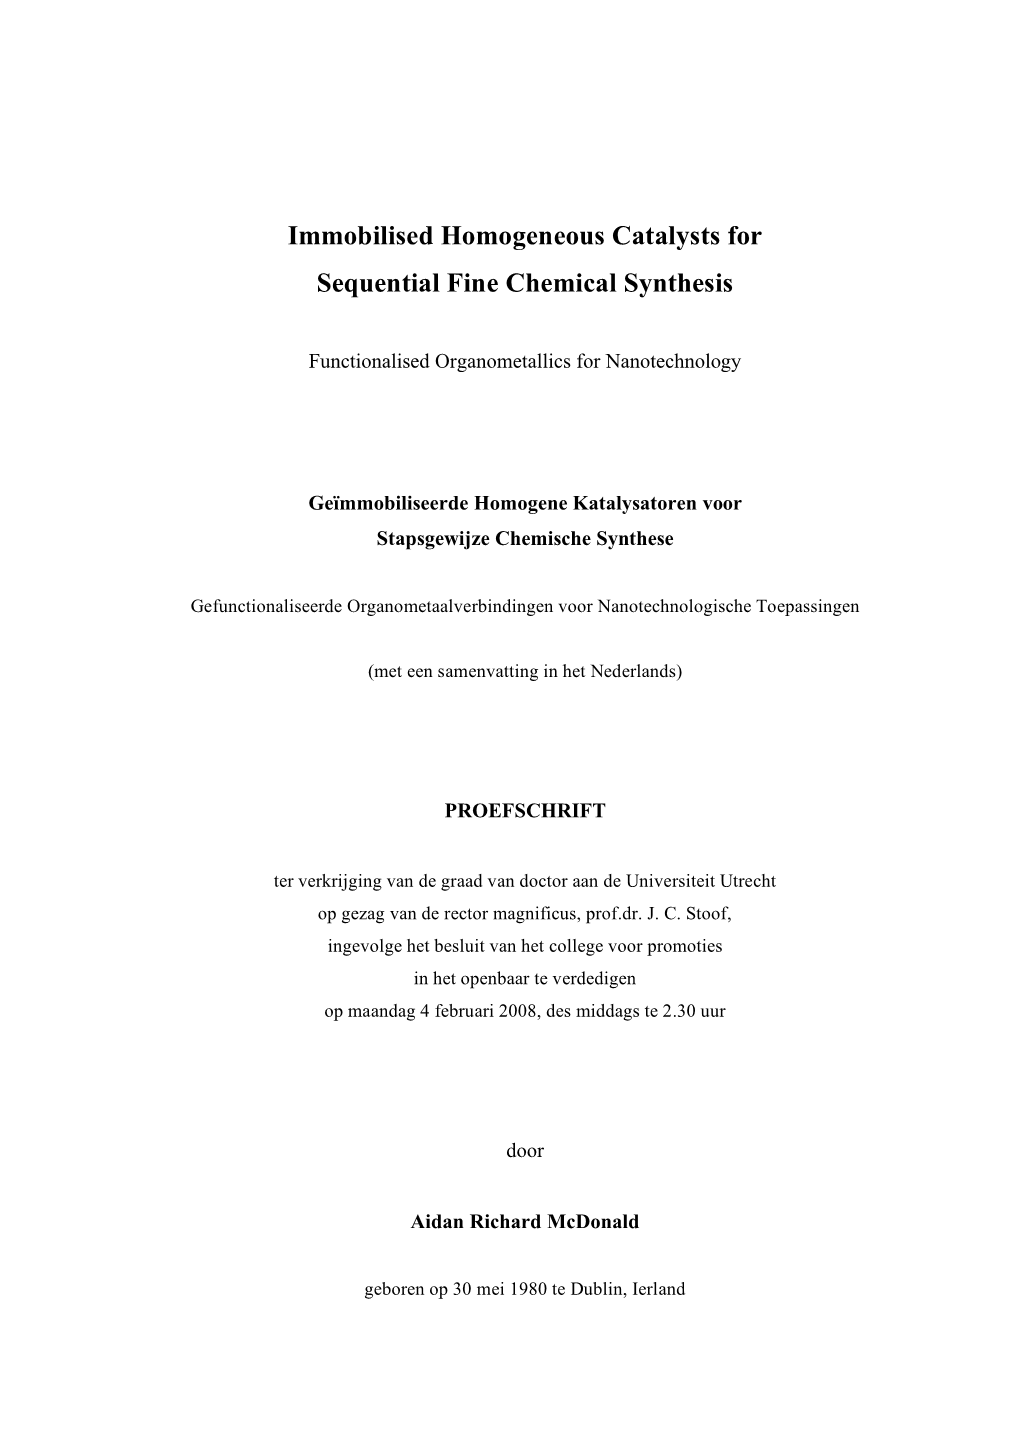 Immobilised Homogeneous Catalysts for Sequential Fine Chemical Synthesis